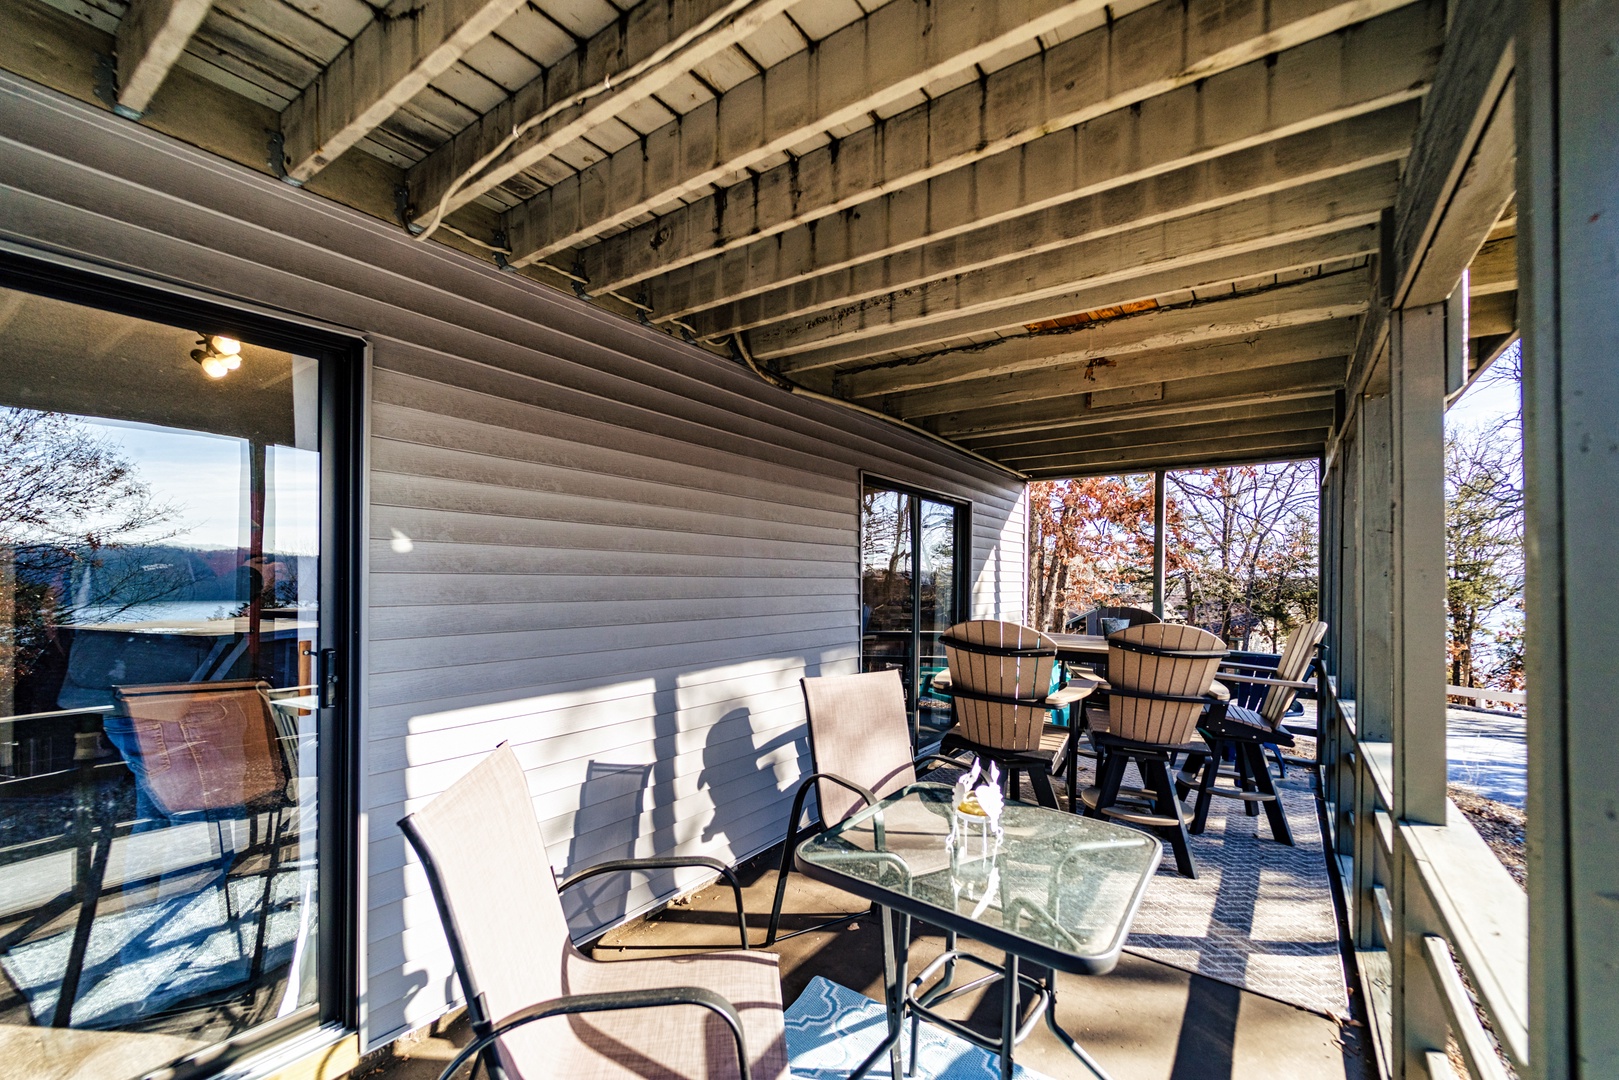 Take in the fresh air & sunshine on the shared back deck